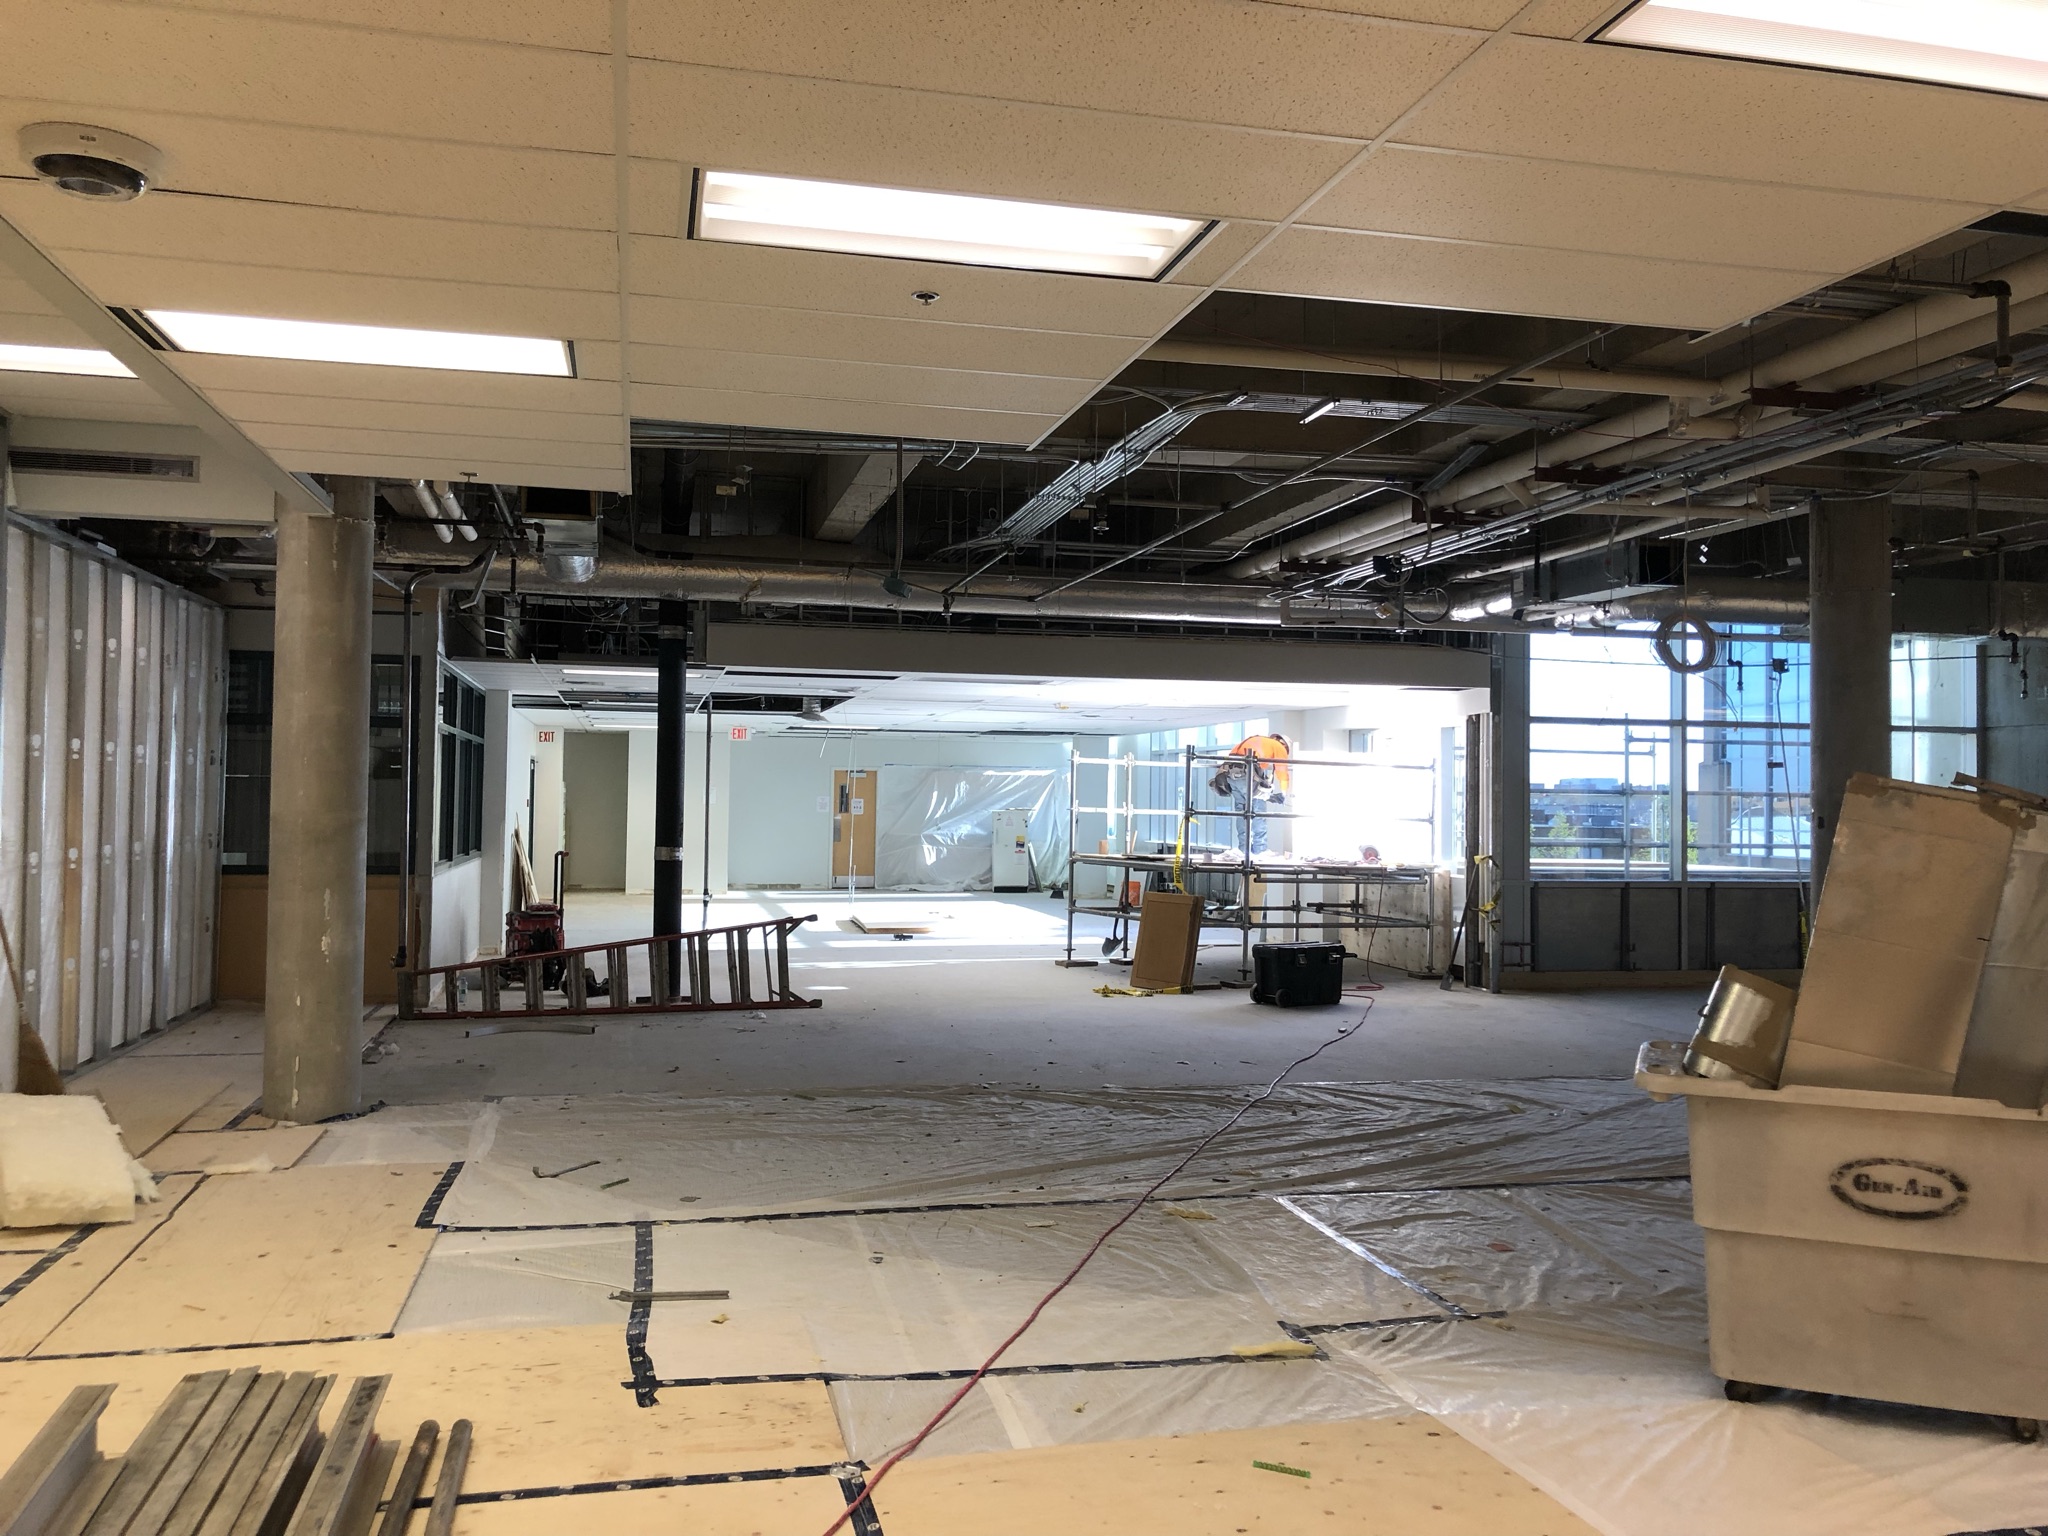 A photograph of the space where the library service desk was. It is now demolished and the wall behind it has been removed to revel the space behind it. Flooring and ceiling have been removed and expose the concrete and wiring underneath.